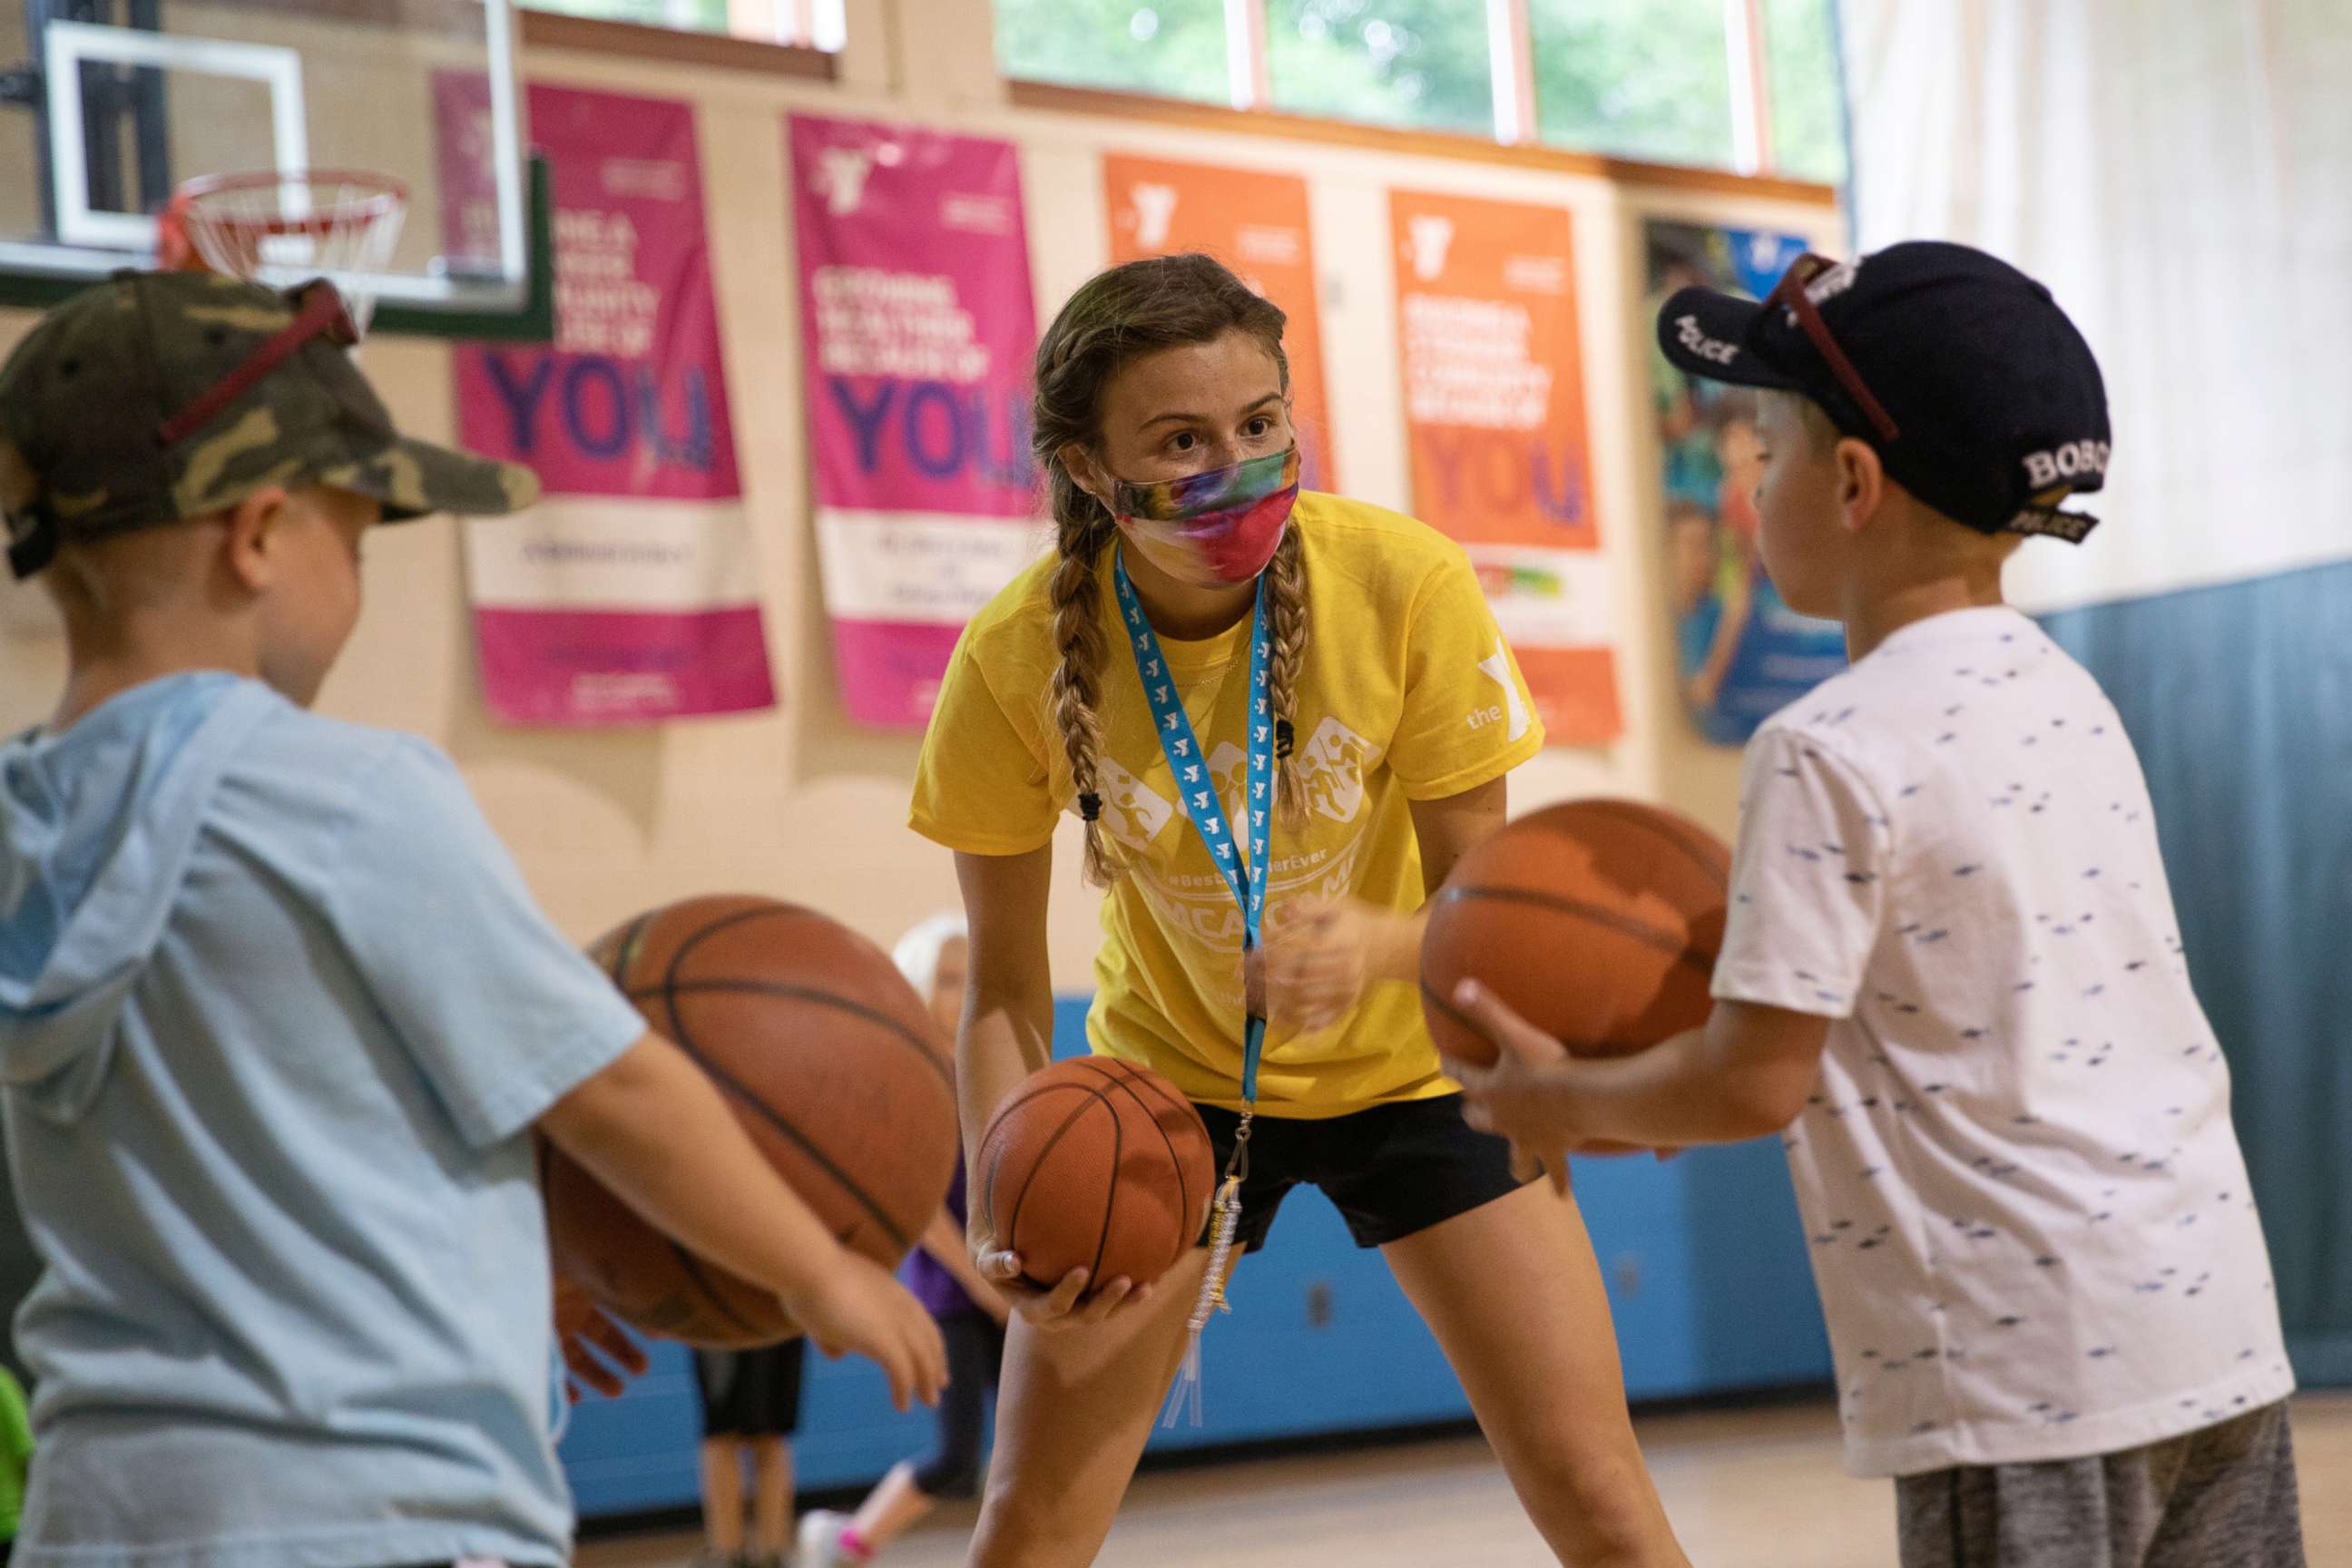 PHOTO: A counselor wearing a protective face mask plays with children as summer camps reopen amid the spread of COVID-19 at Carls Family YMCA summer camp in Milford, Mich., June 23, 2020.